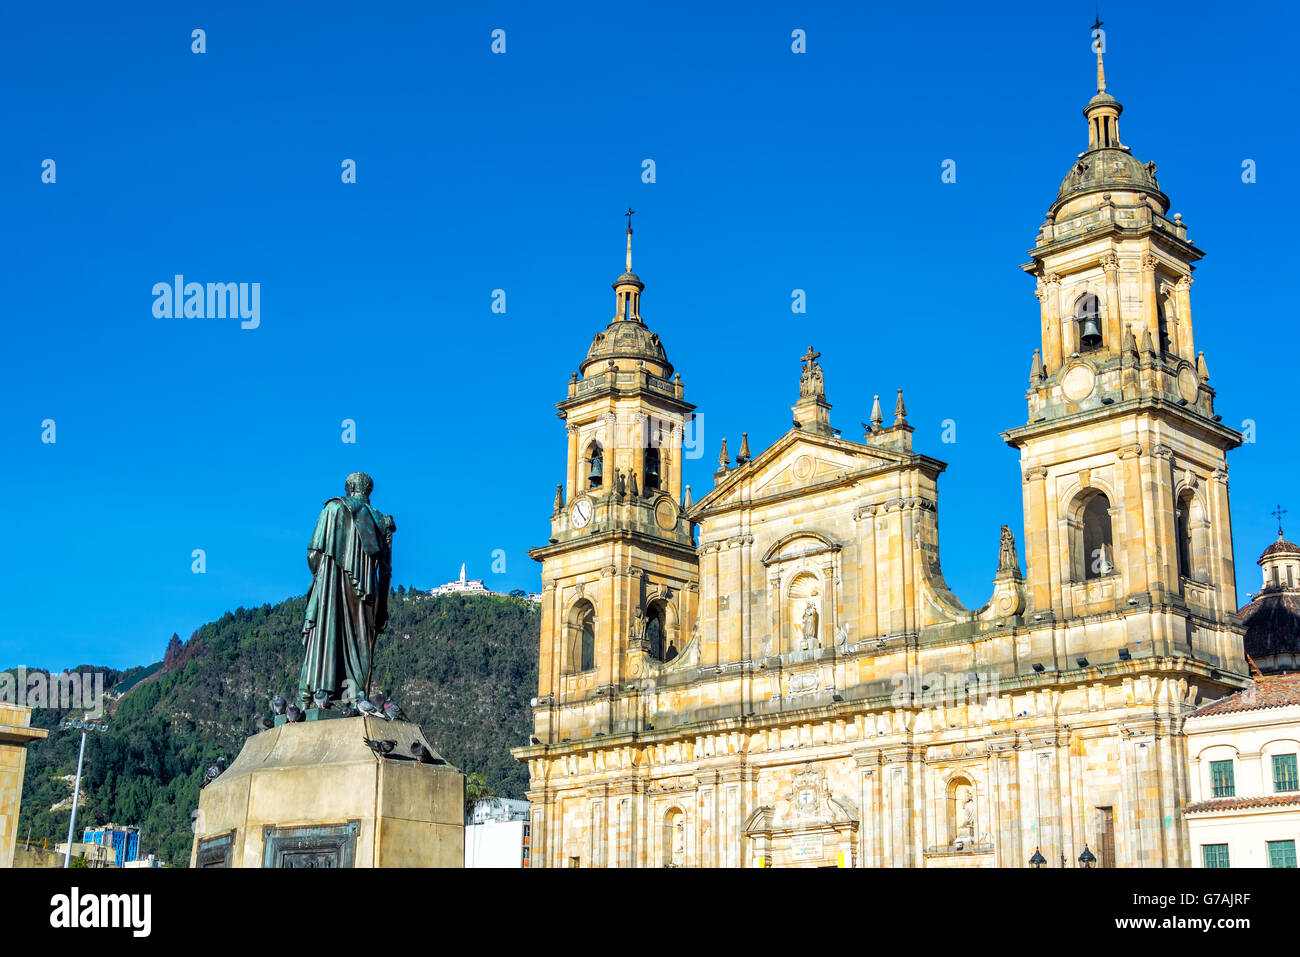 View of the cathedral in the Plaza de Bolivar in the center of Bogota, Colombia with Monserrate visible on the hill Stock Photo